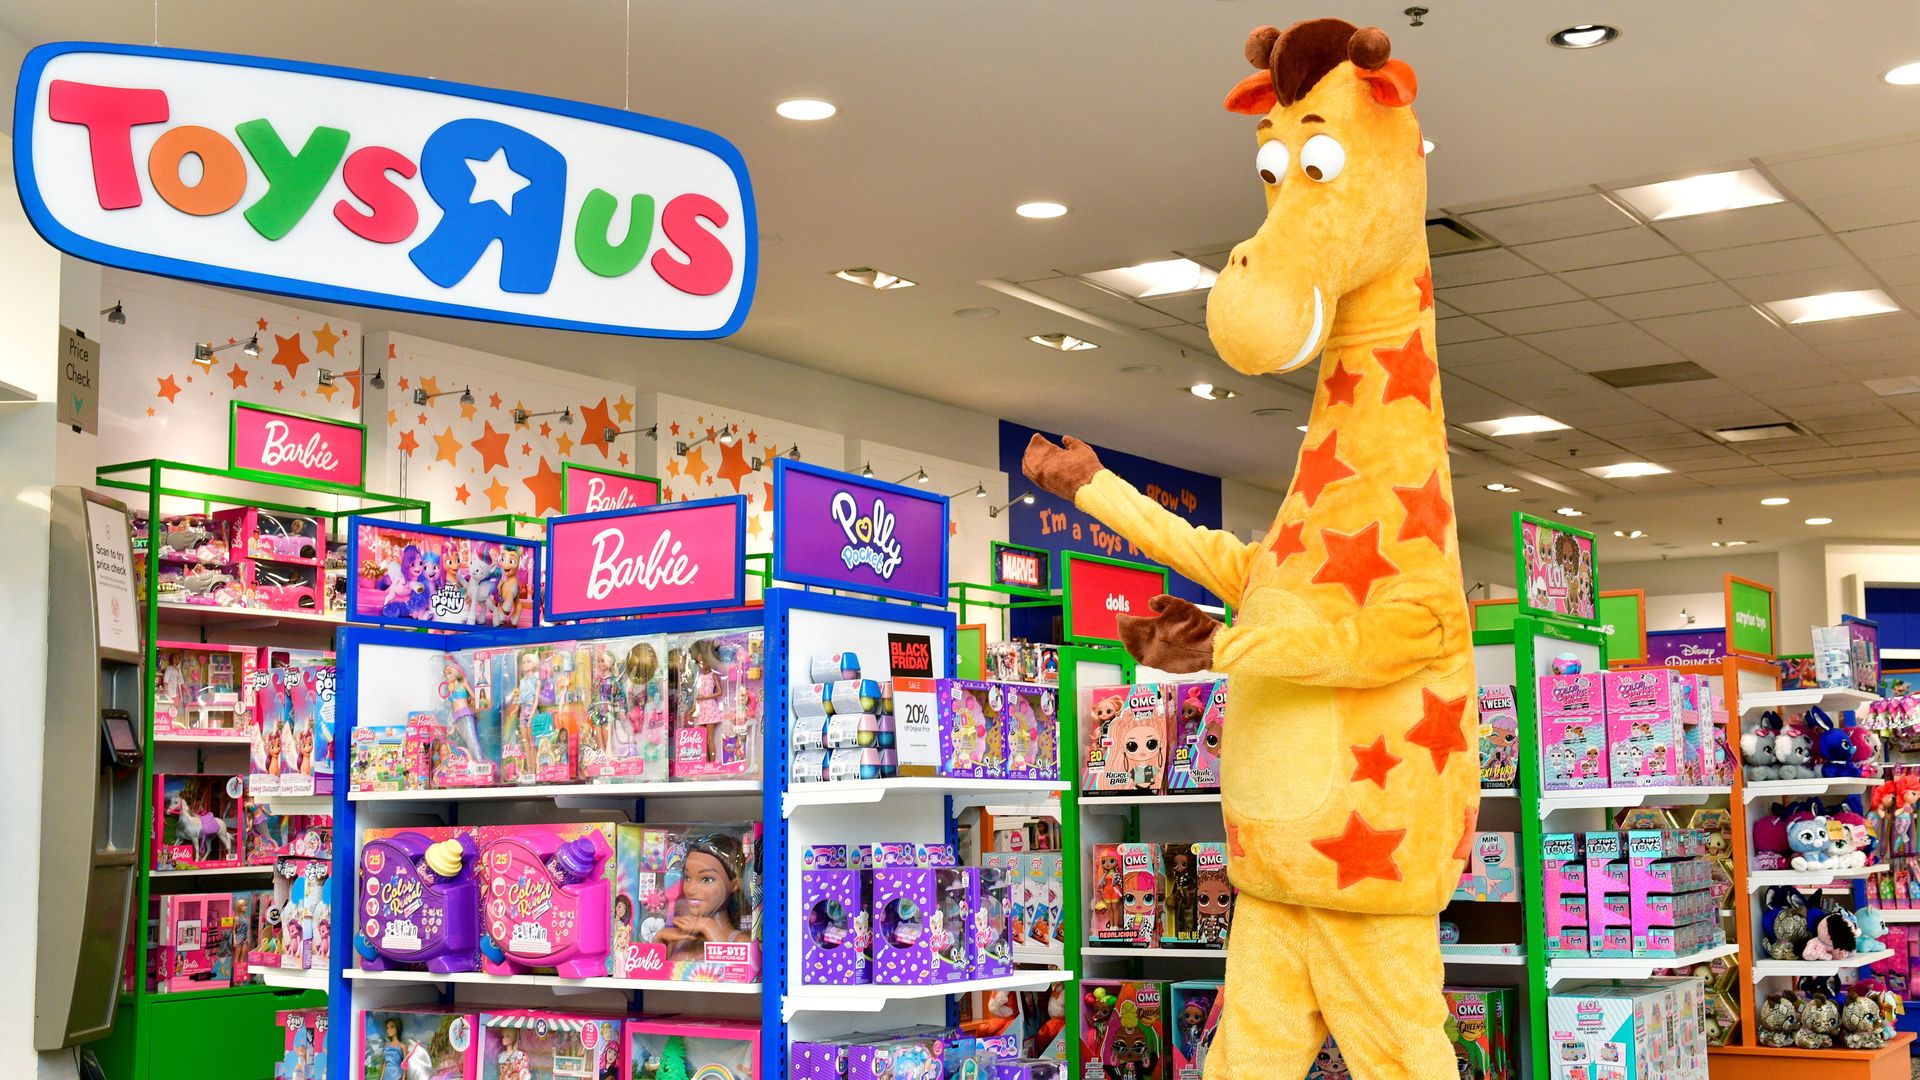 Toys R Us sign, toy displays and giraffe mascot